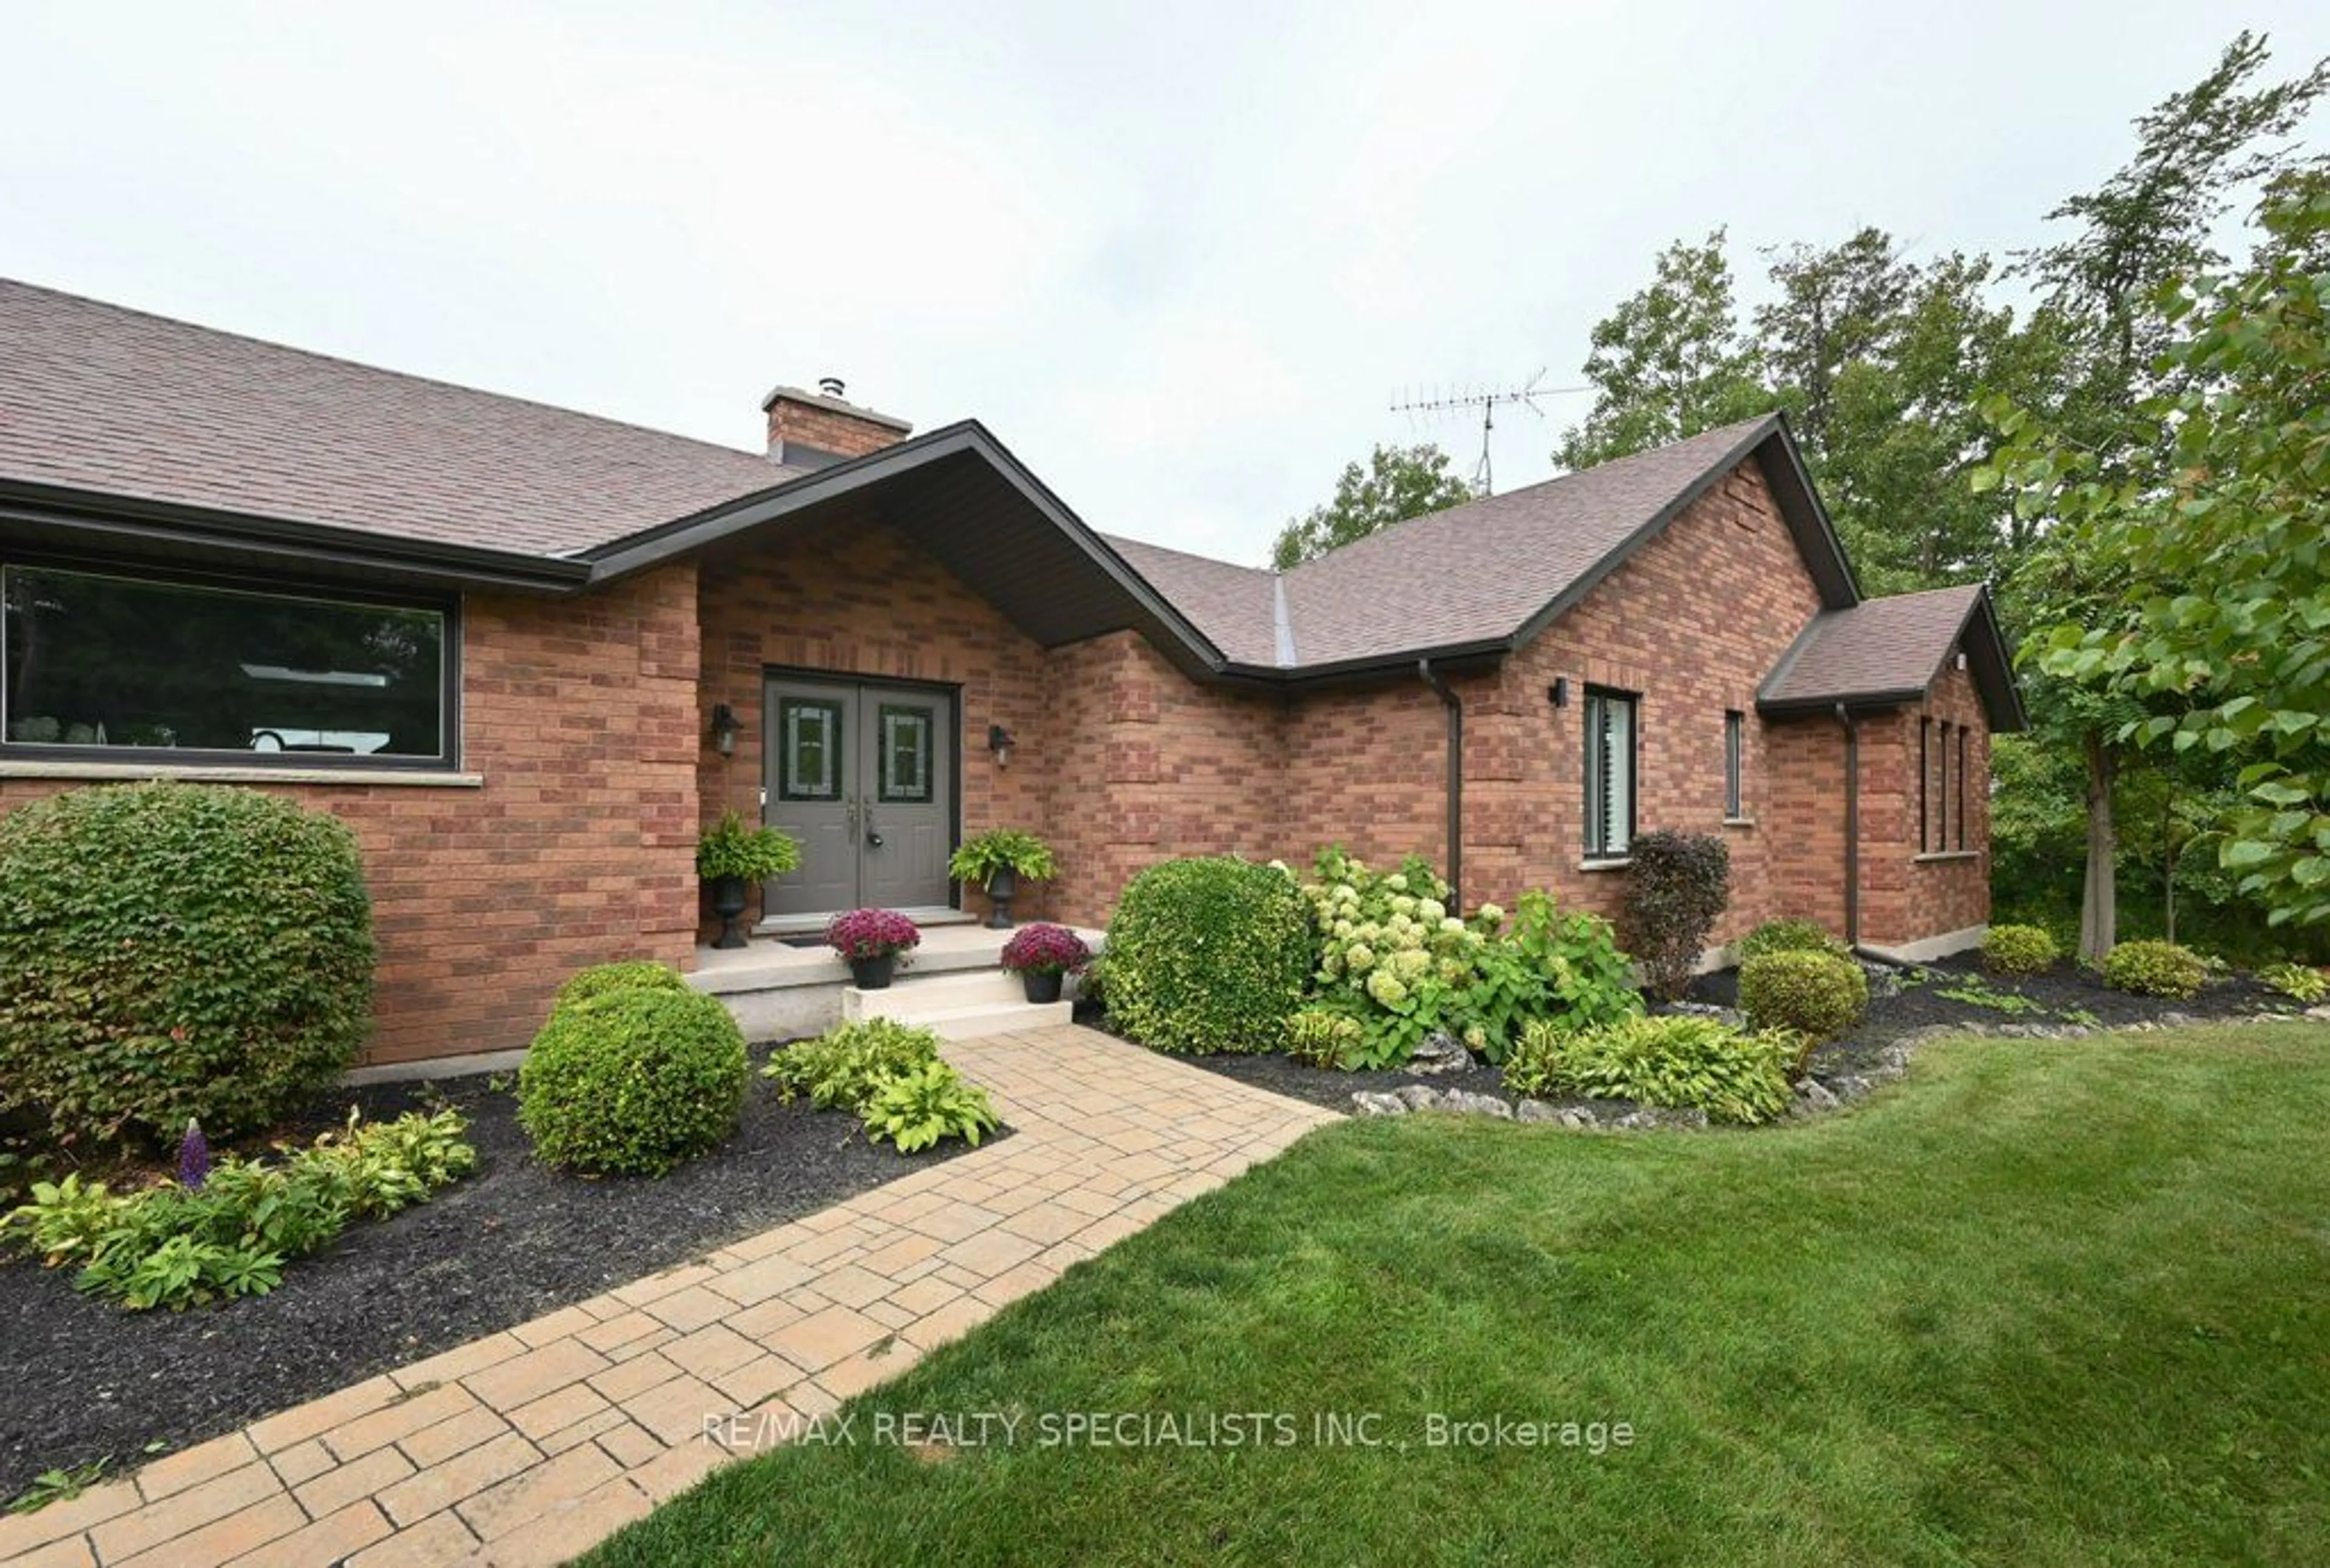 Home with brick exterior material for 9342 9 Sdrd, Erin Ontario N0B 1T0